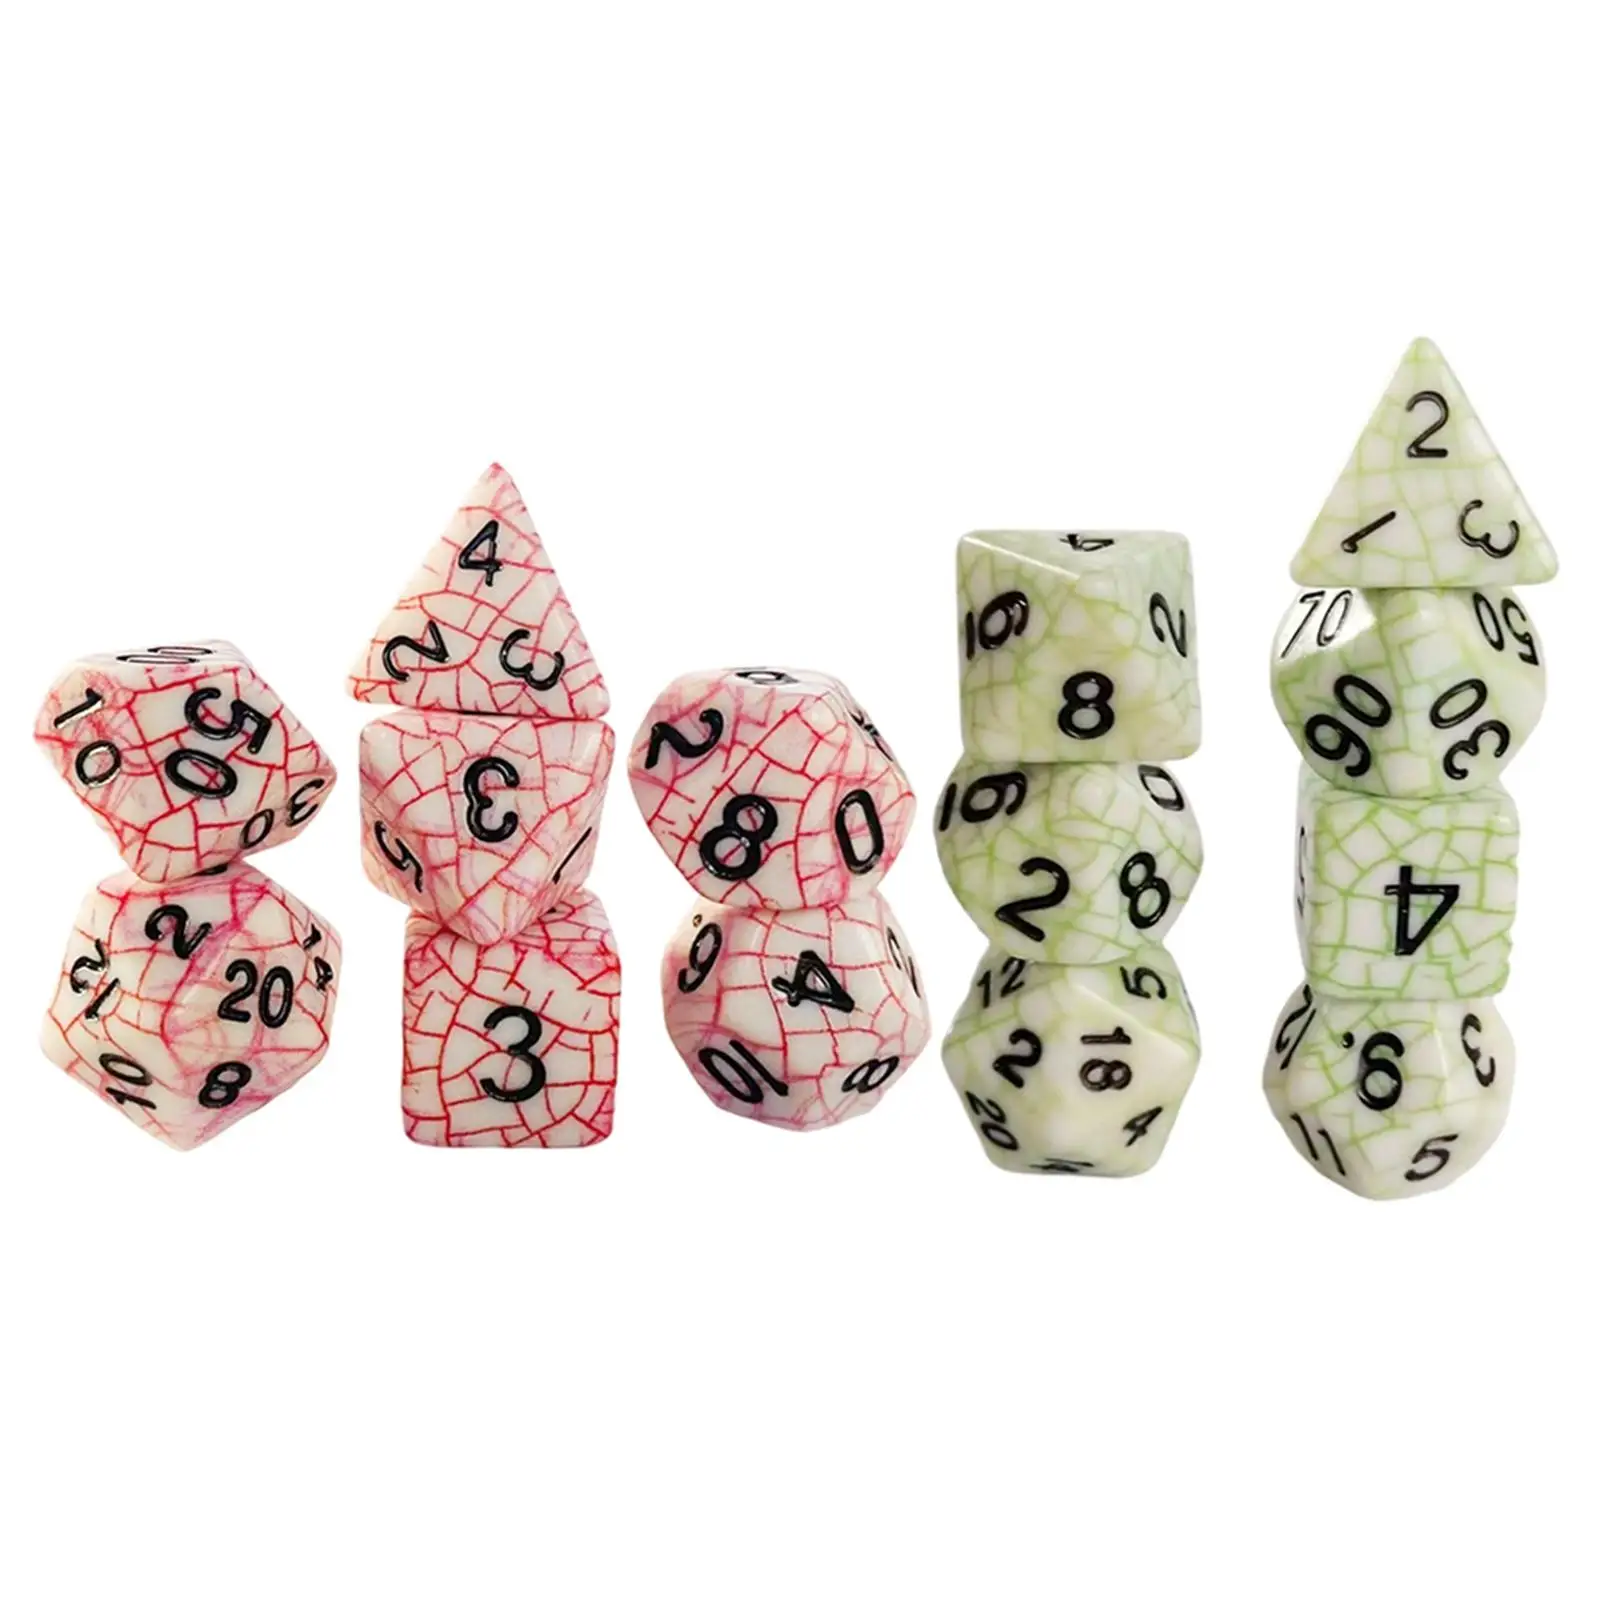 7x Acrylic Polyhedron Dice, D4-D20 Die D20 D12 D10 D10% D8 D6 D4, Multi Sided Dice Set, for Party Prop Entertainment DND RPG MTG